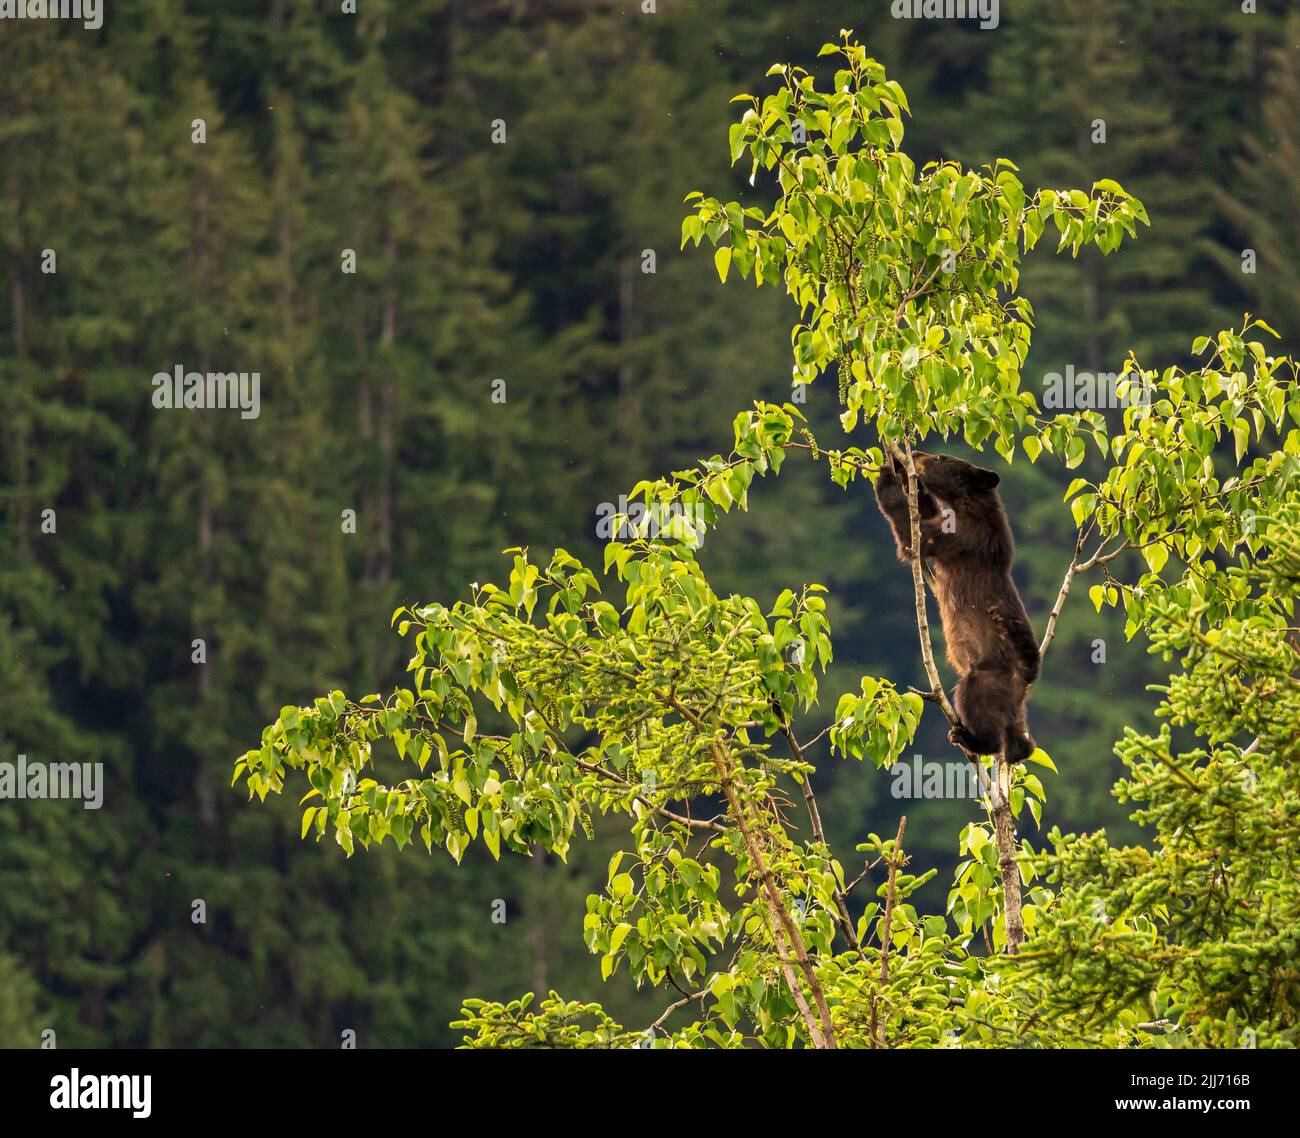 Brown or perhaps black bear cub climbing high into a tree in search of new foliage to eat in Alaska Stock Photo